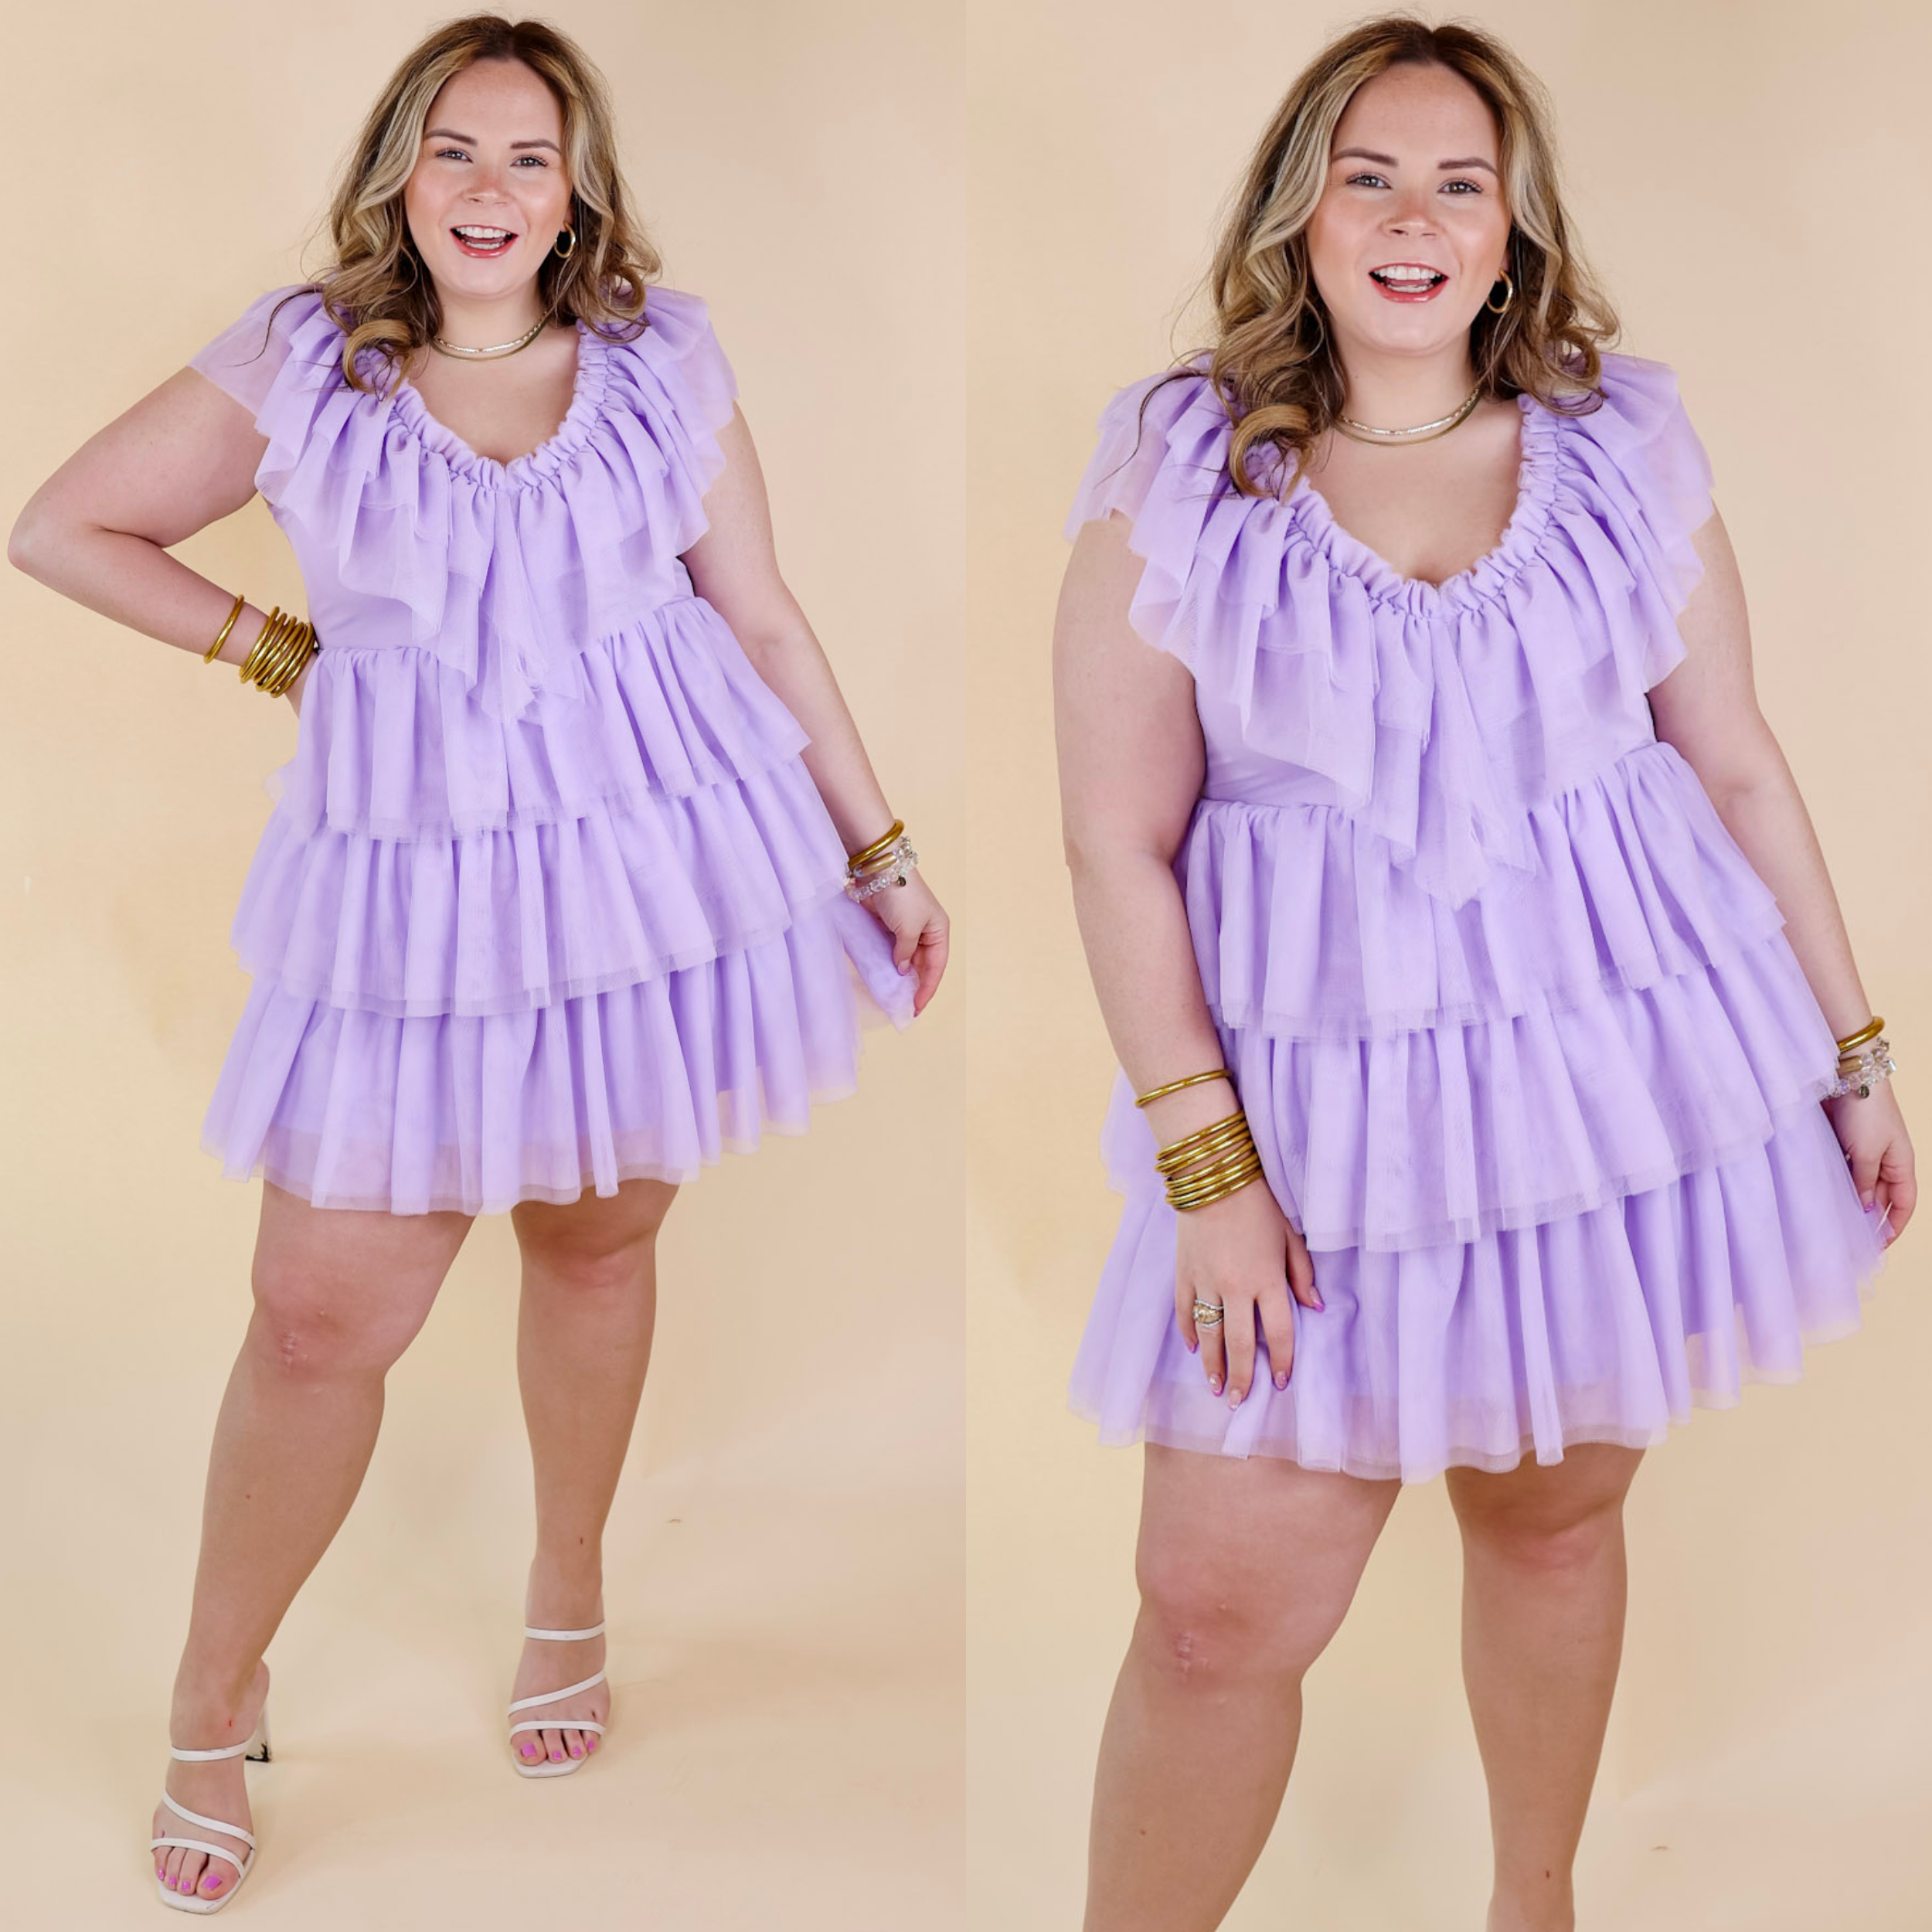 Model is wearing a lavender purple short dress made of ruffle tulle. Model has this dress paired with white strappy heels and gold jewelry.